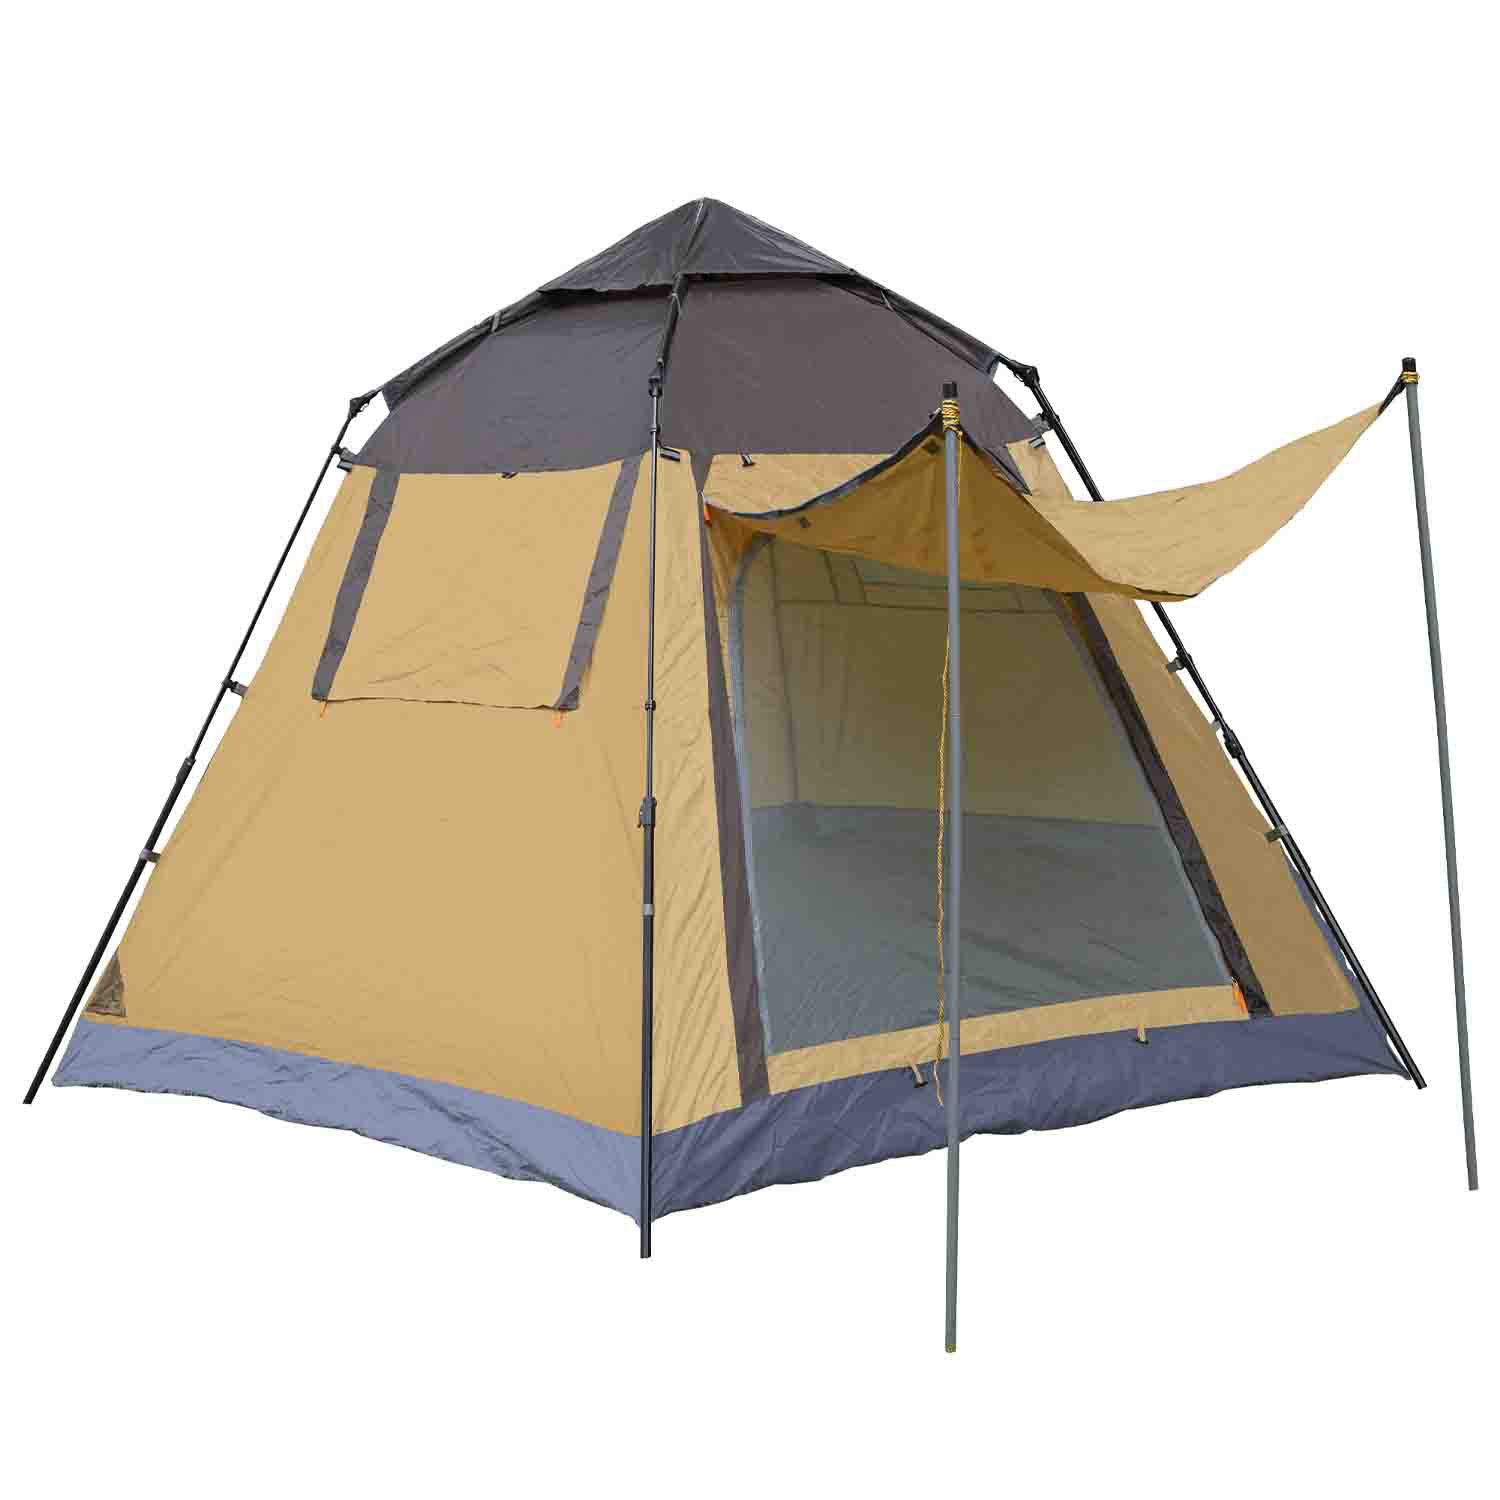 Hydraulic Pop Up Waterproof Camping Tent - 4-5 Person